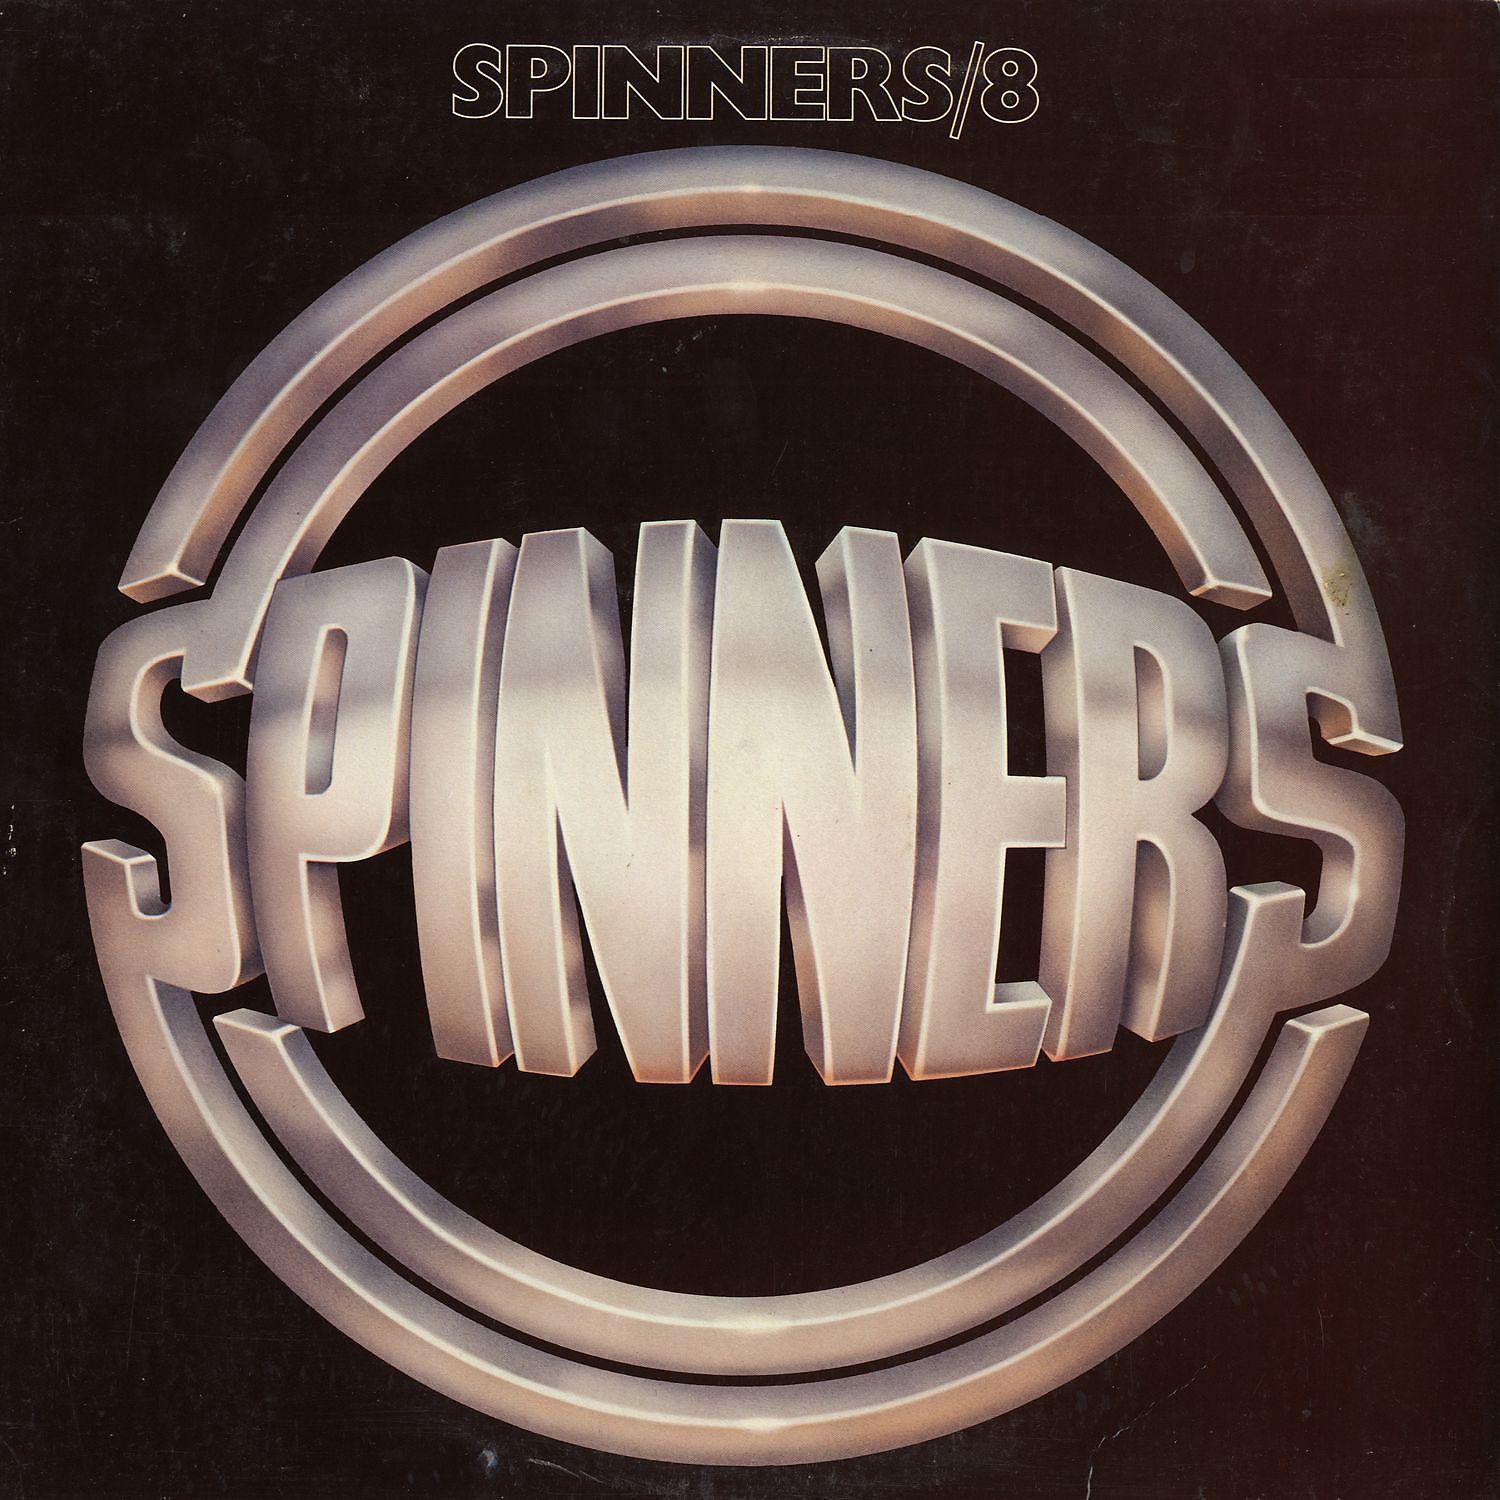 Spinning mp3. Spinner. Spinners - 2013 - Love Trippin'. I Love Spinning. Turn the Spinner in the Lottery.